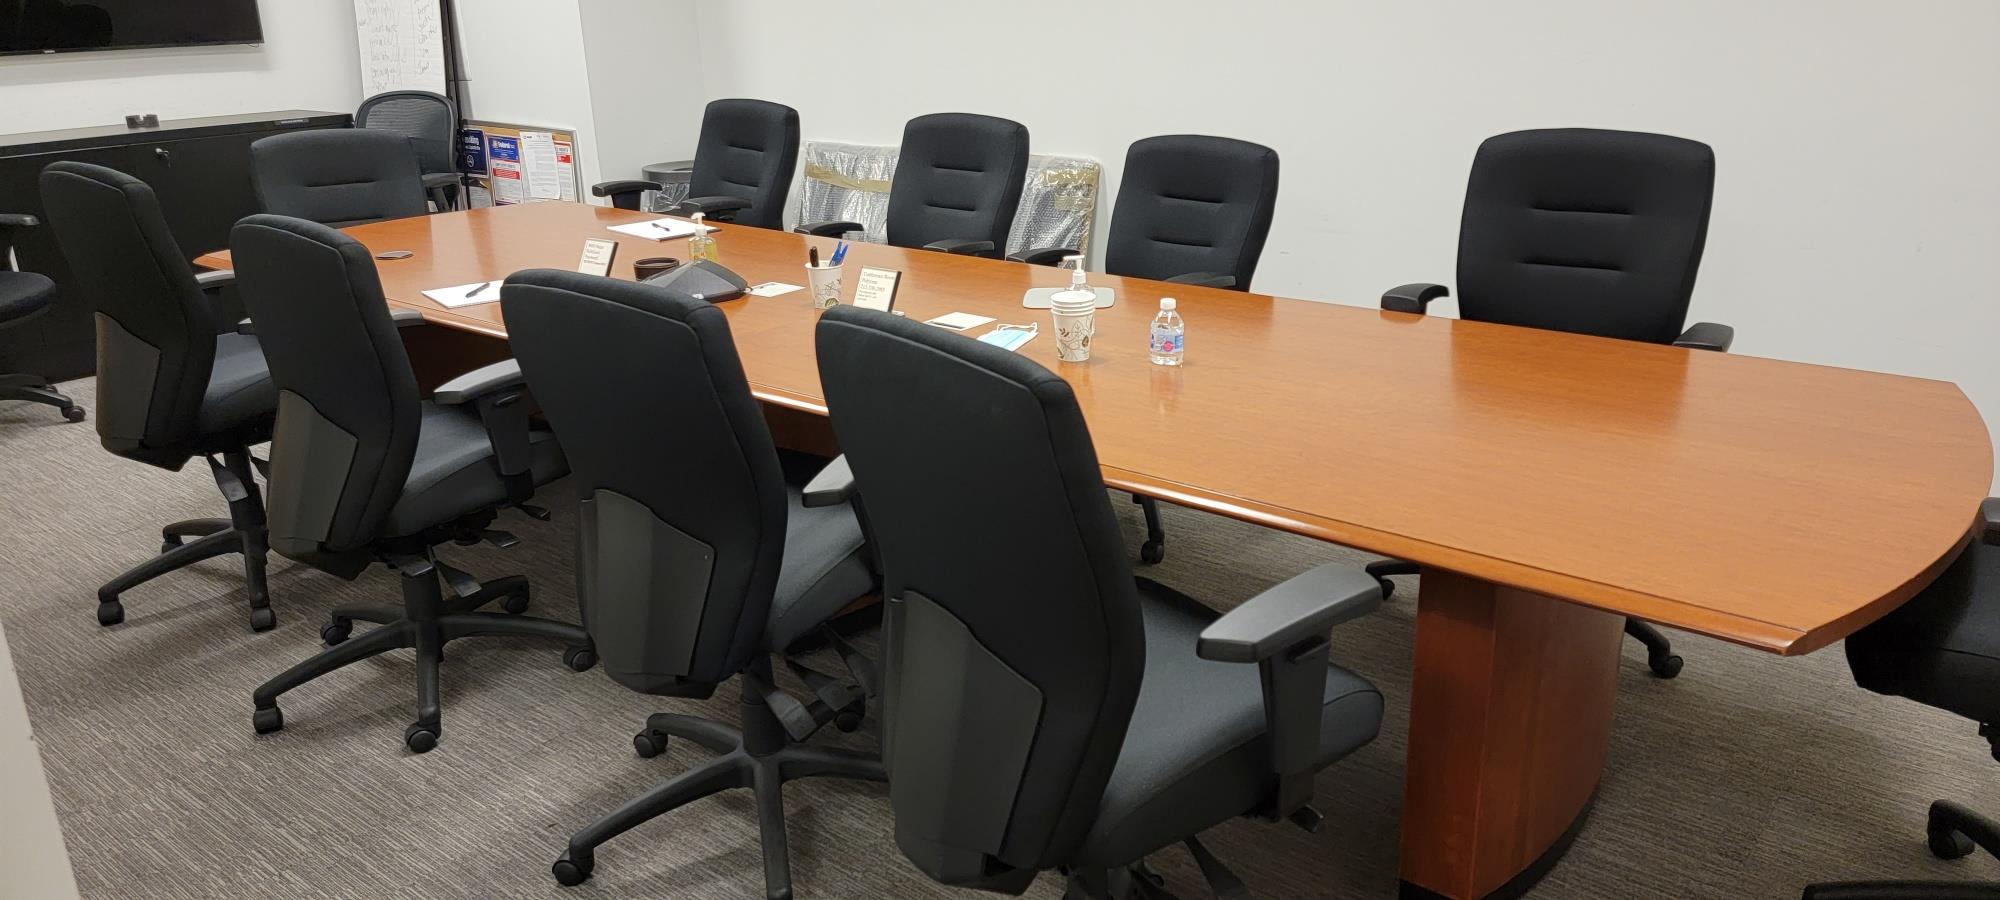 T12195 - 14' Conference Table